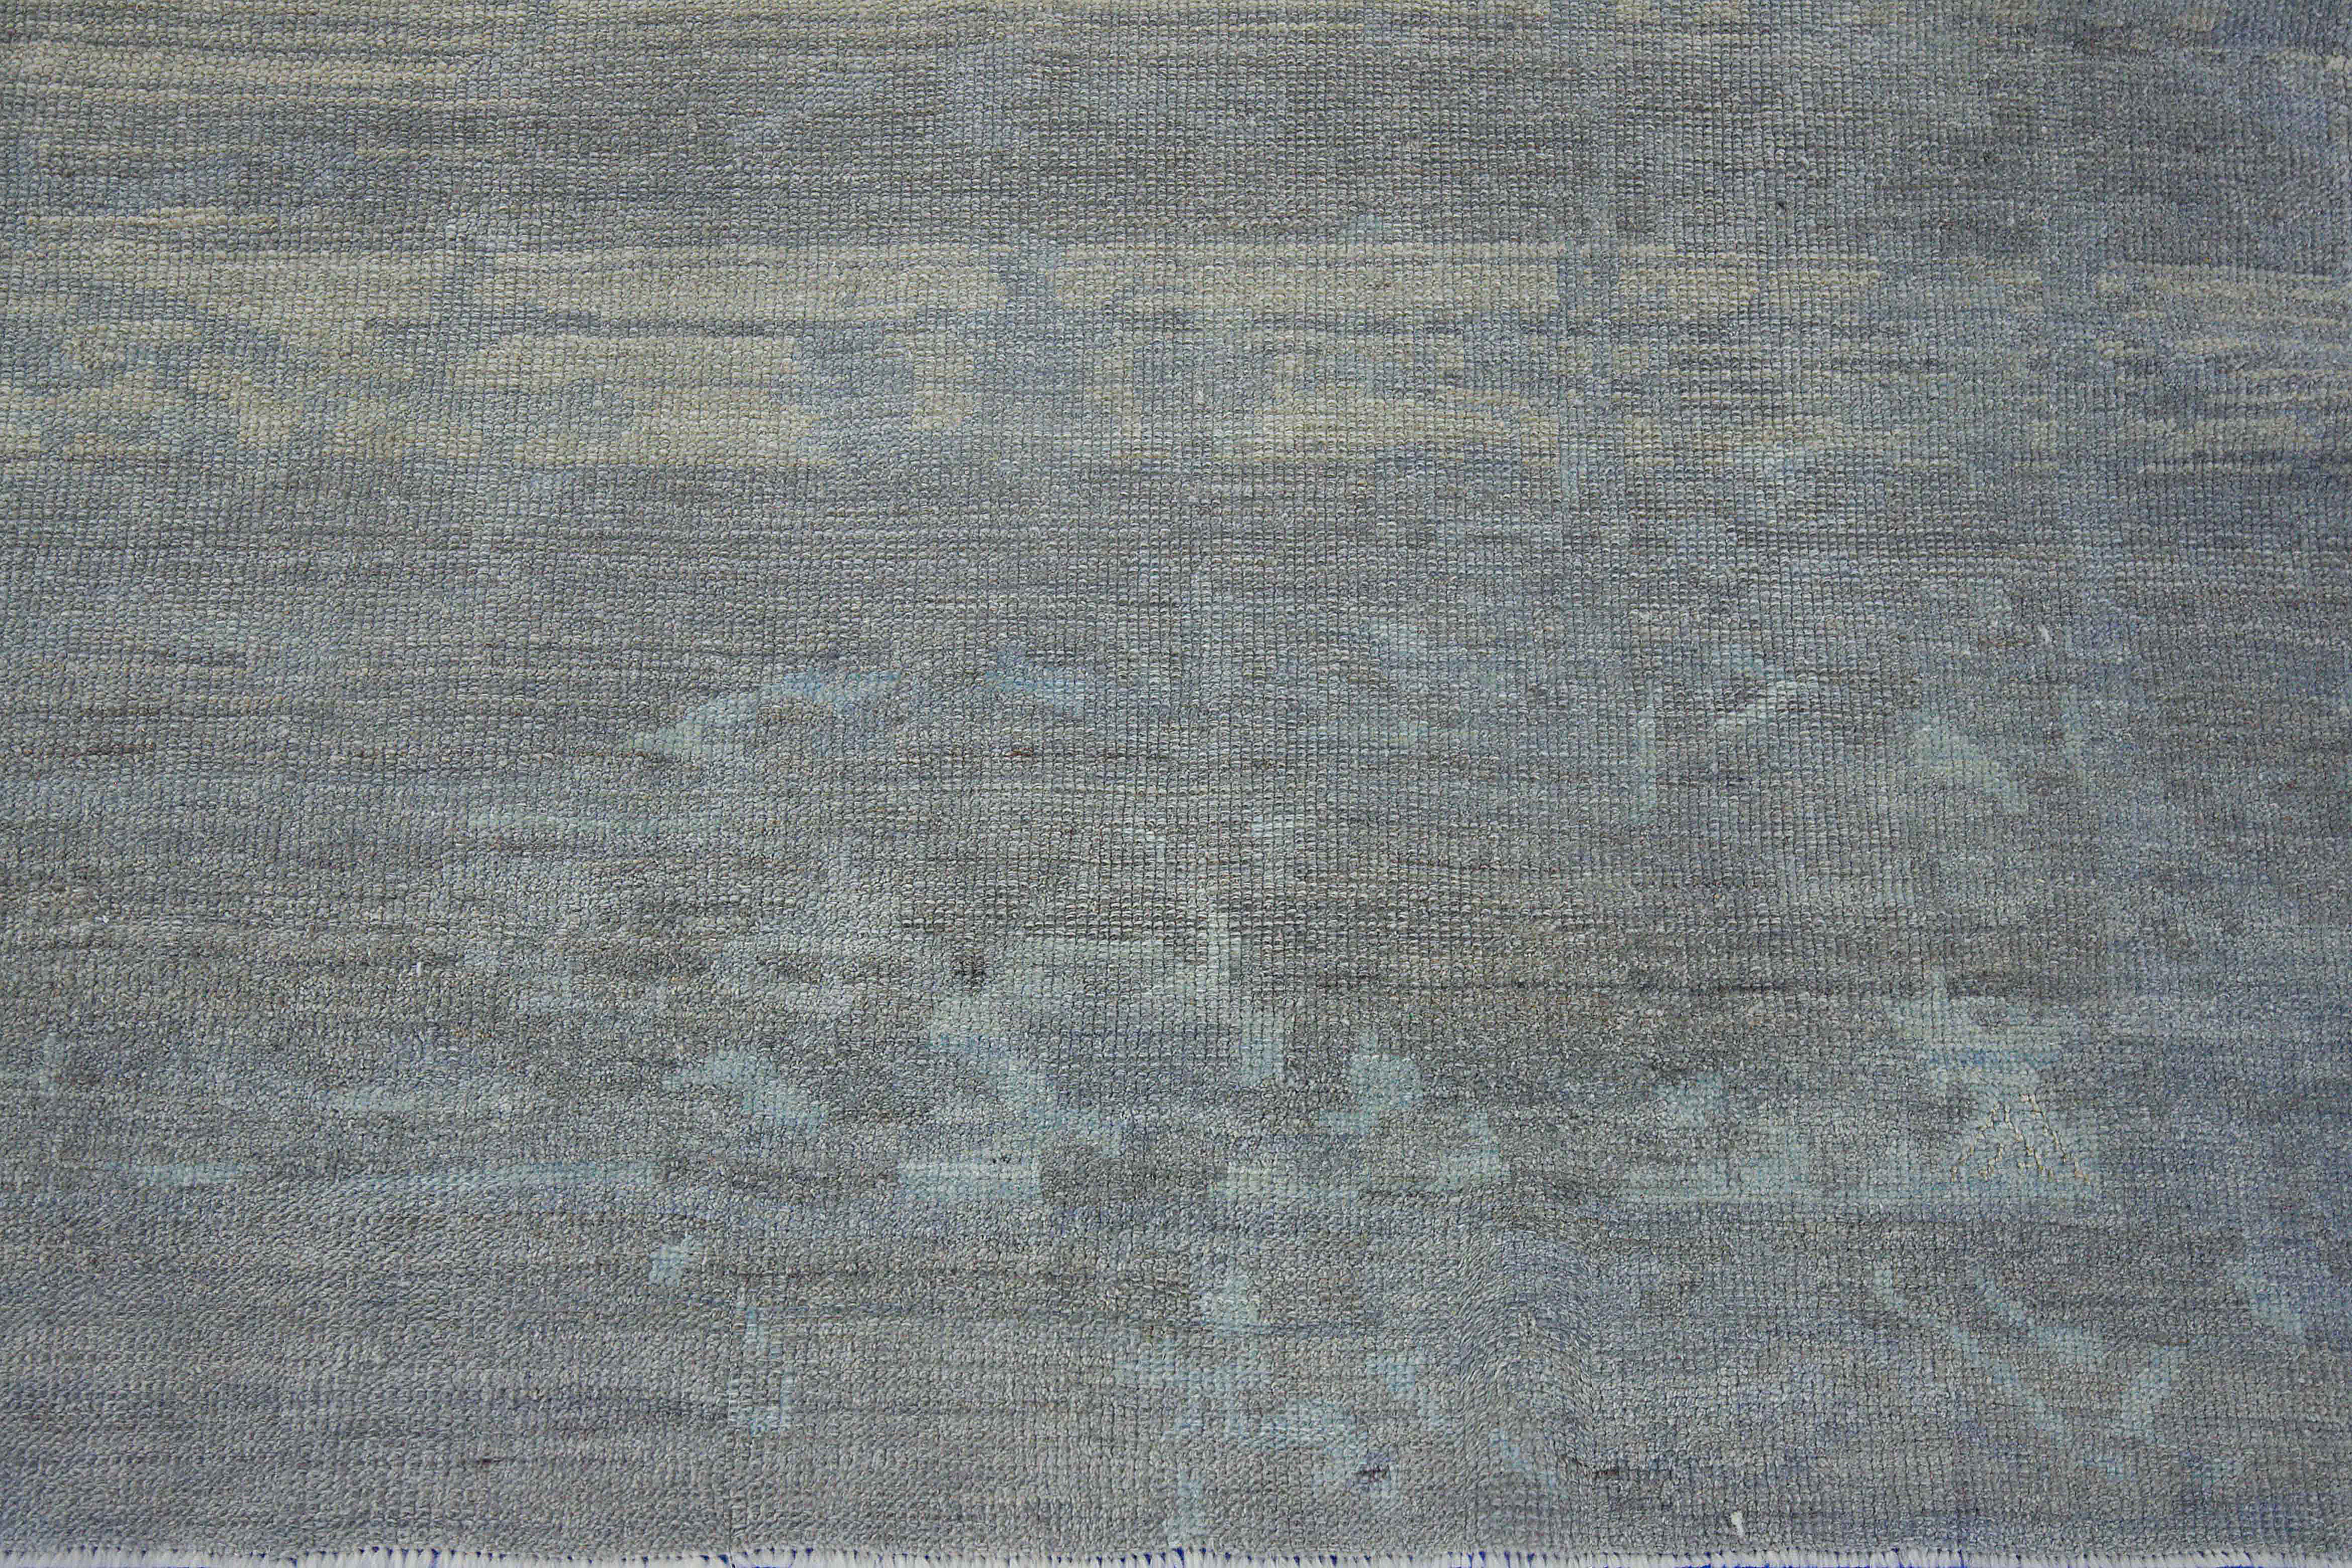 Modern Turkish rug made of handwoven sheep’s wool of the finest quality. It’s colored with organic vegetable dyes that are certified safe for humans and pets alike. It features a lovely beige field with floral details in blue and gray commonly